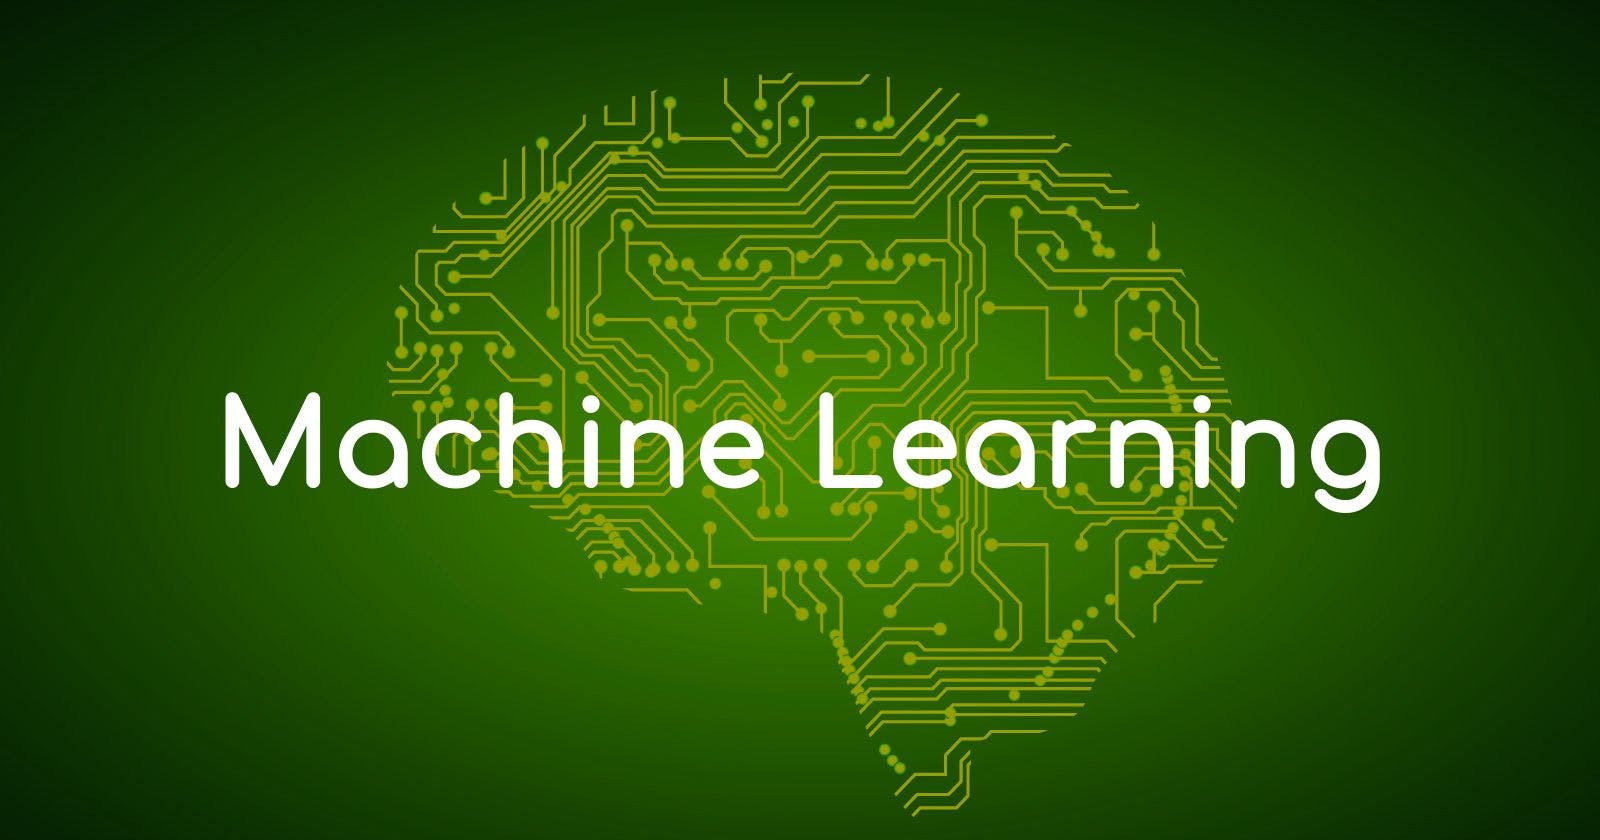 All Topics of Machine Learning You Should Know